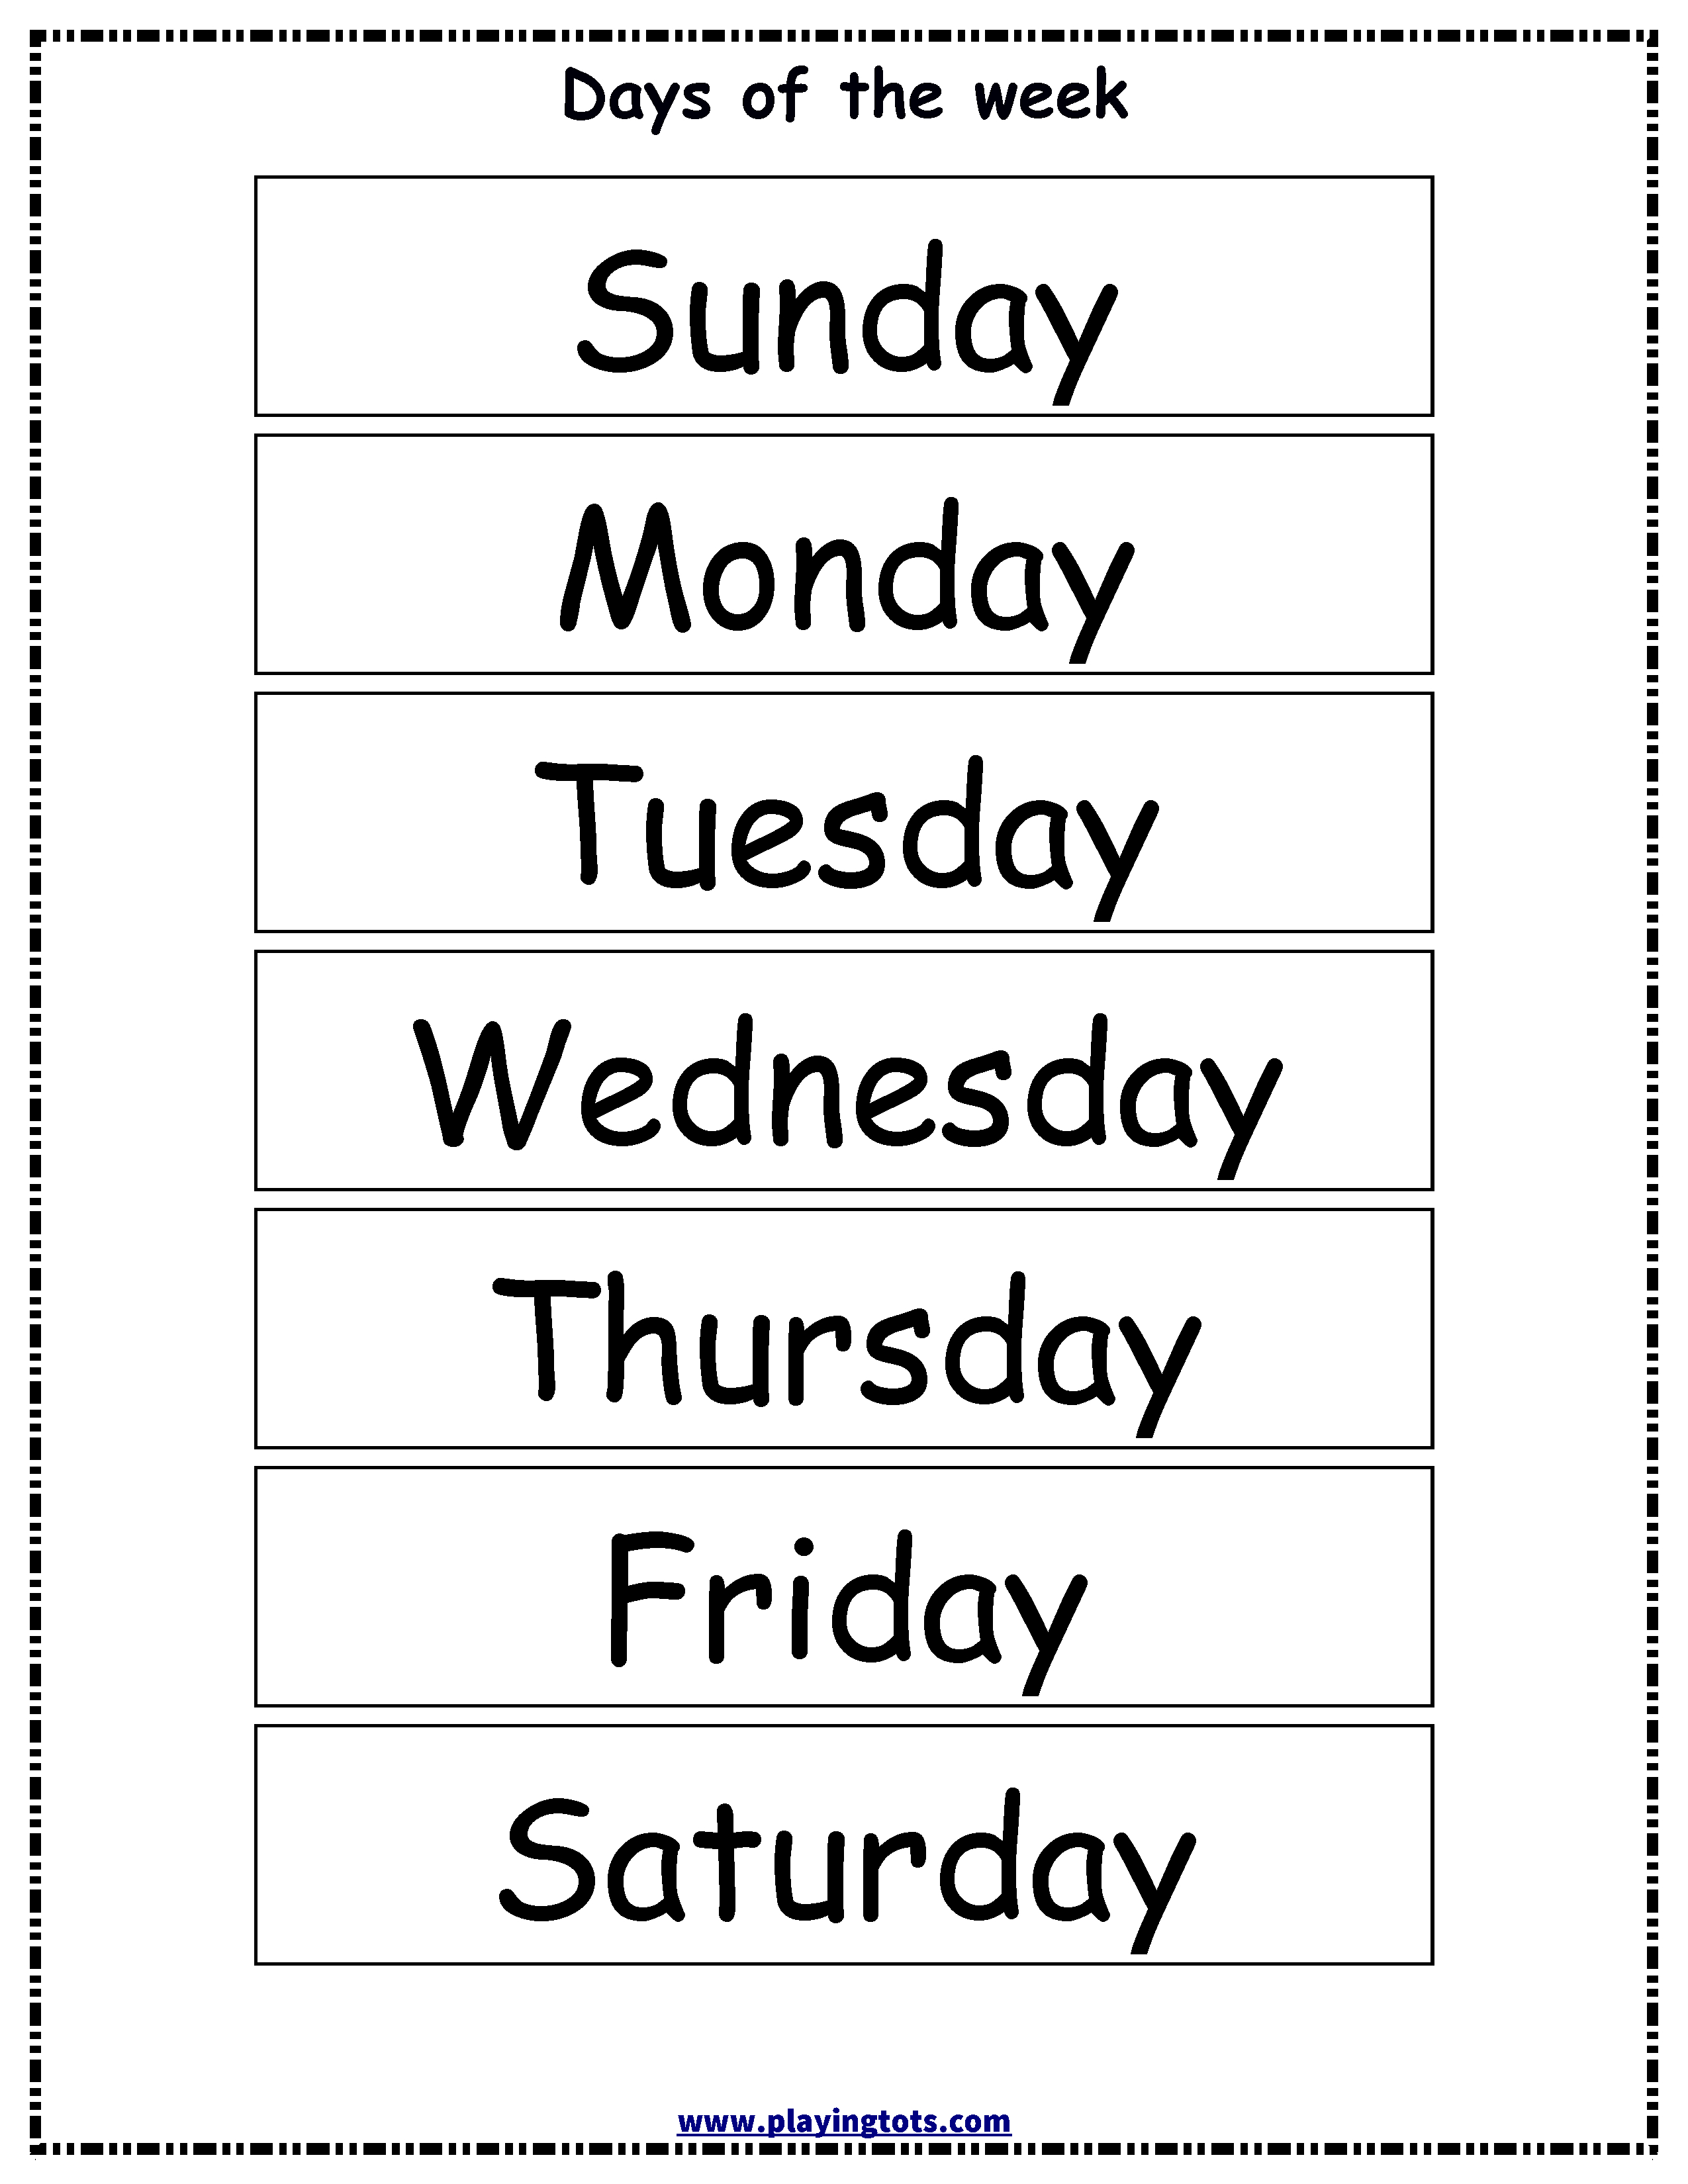 Free Printable Days Of The Week Chart | Classroom Ideas | Learning - Free Printable Days Of The Week